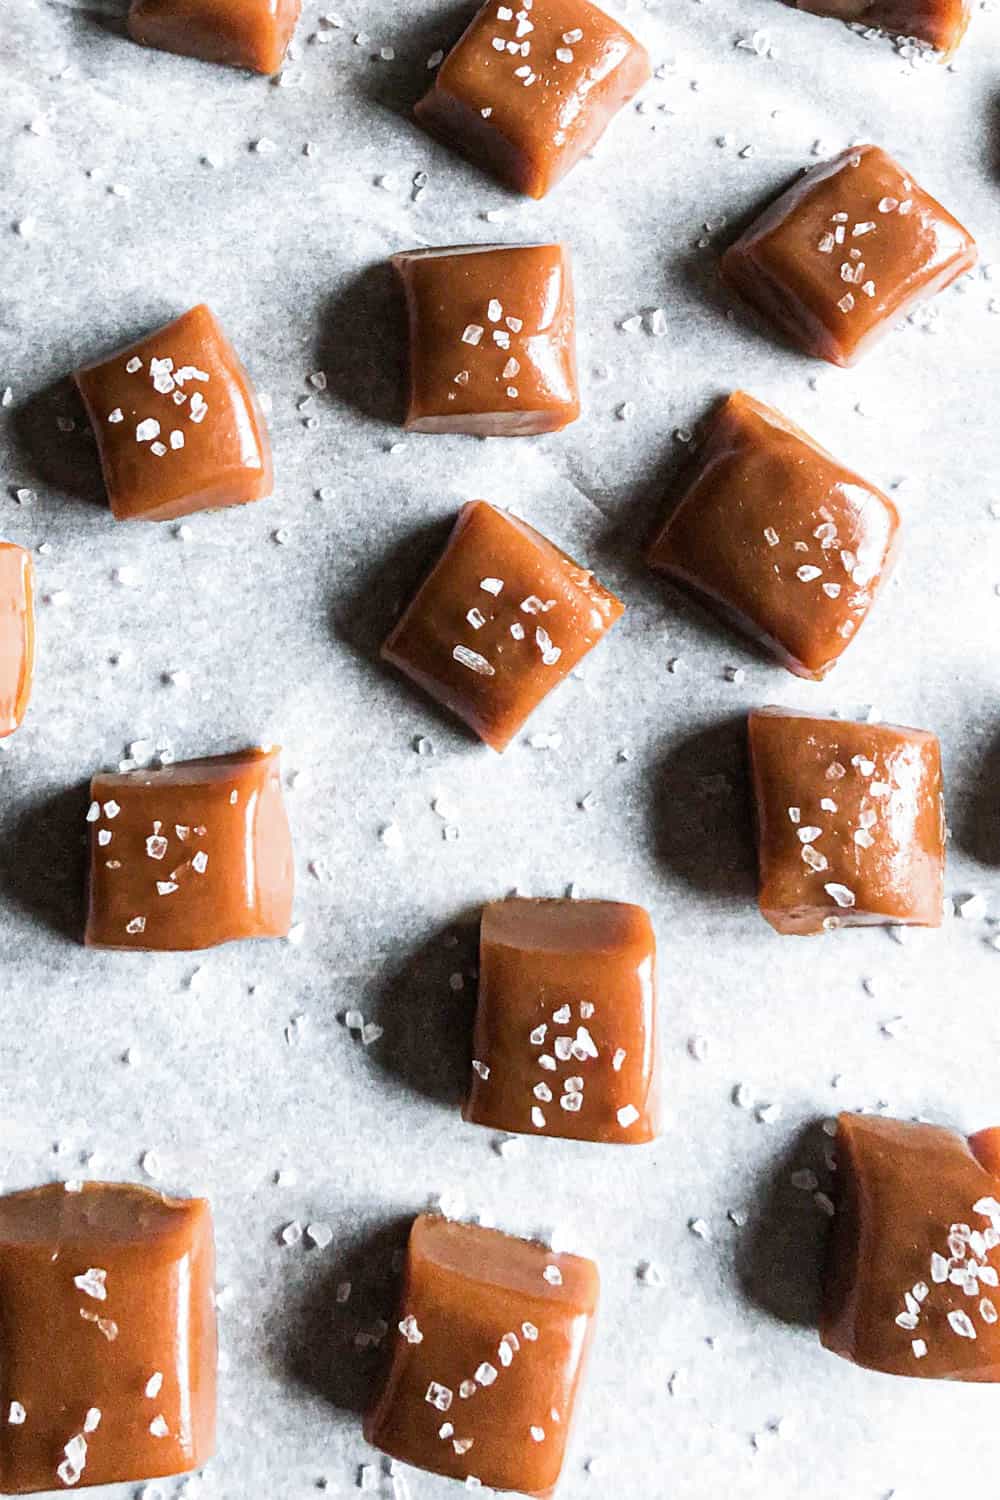 whiskey salted caramels on parchment paper sprinkled with sea salt.